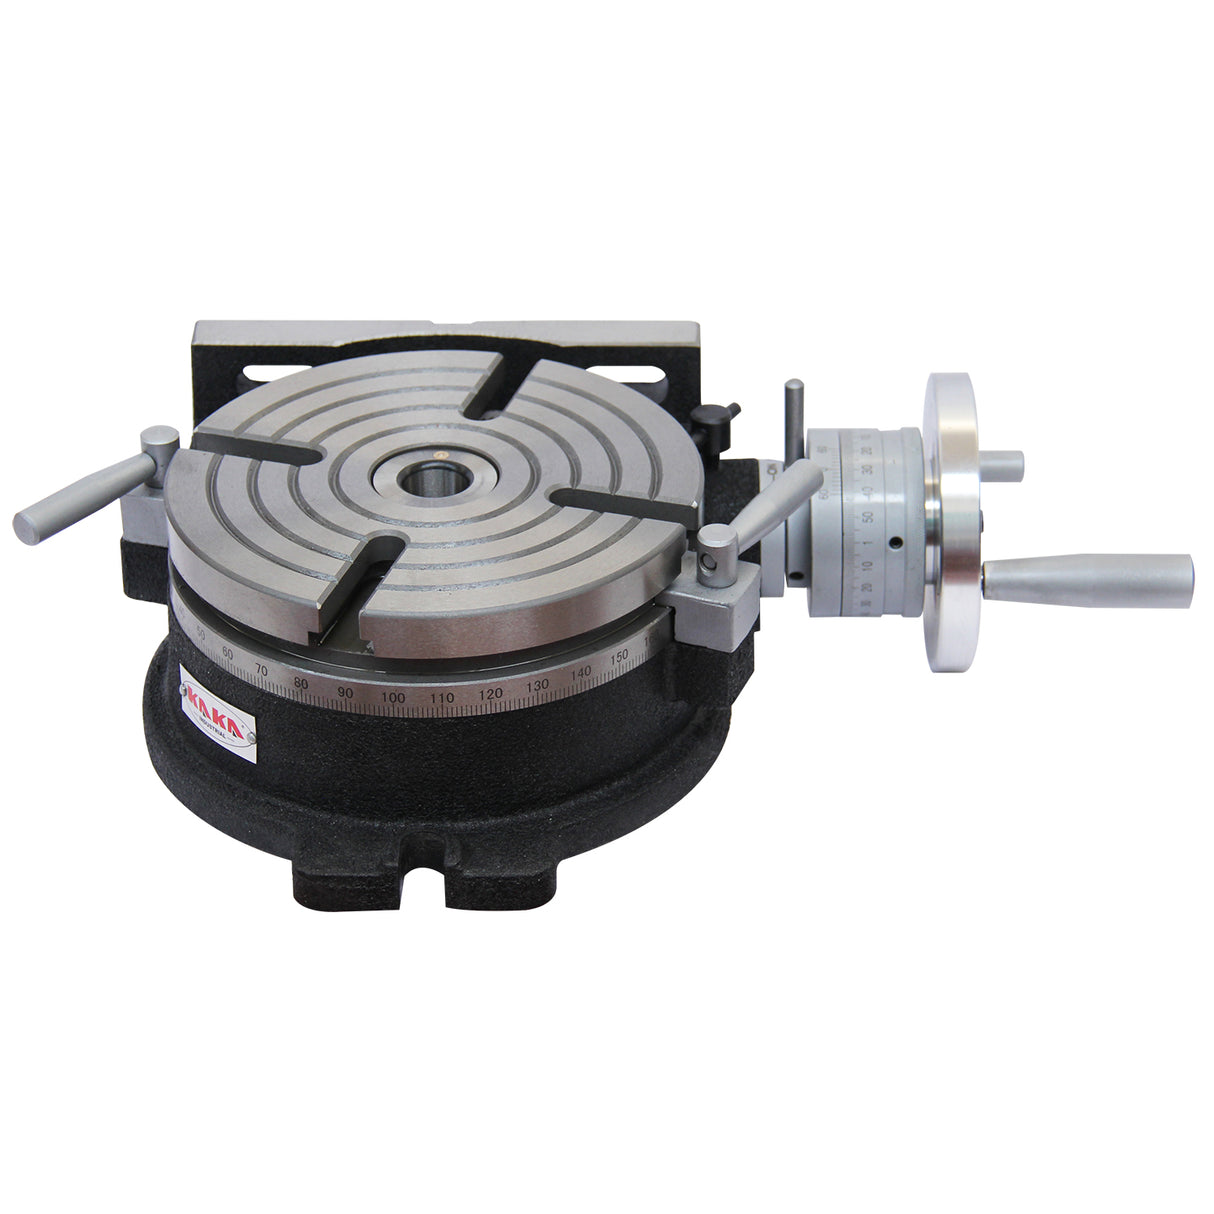 Kang Industrial HV-8 ø200mm Horizontal Vertical Rotary Table, Cast Iron Rotary Table, MT3 Bore